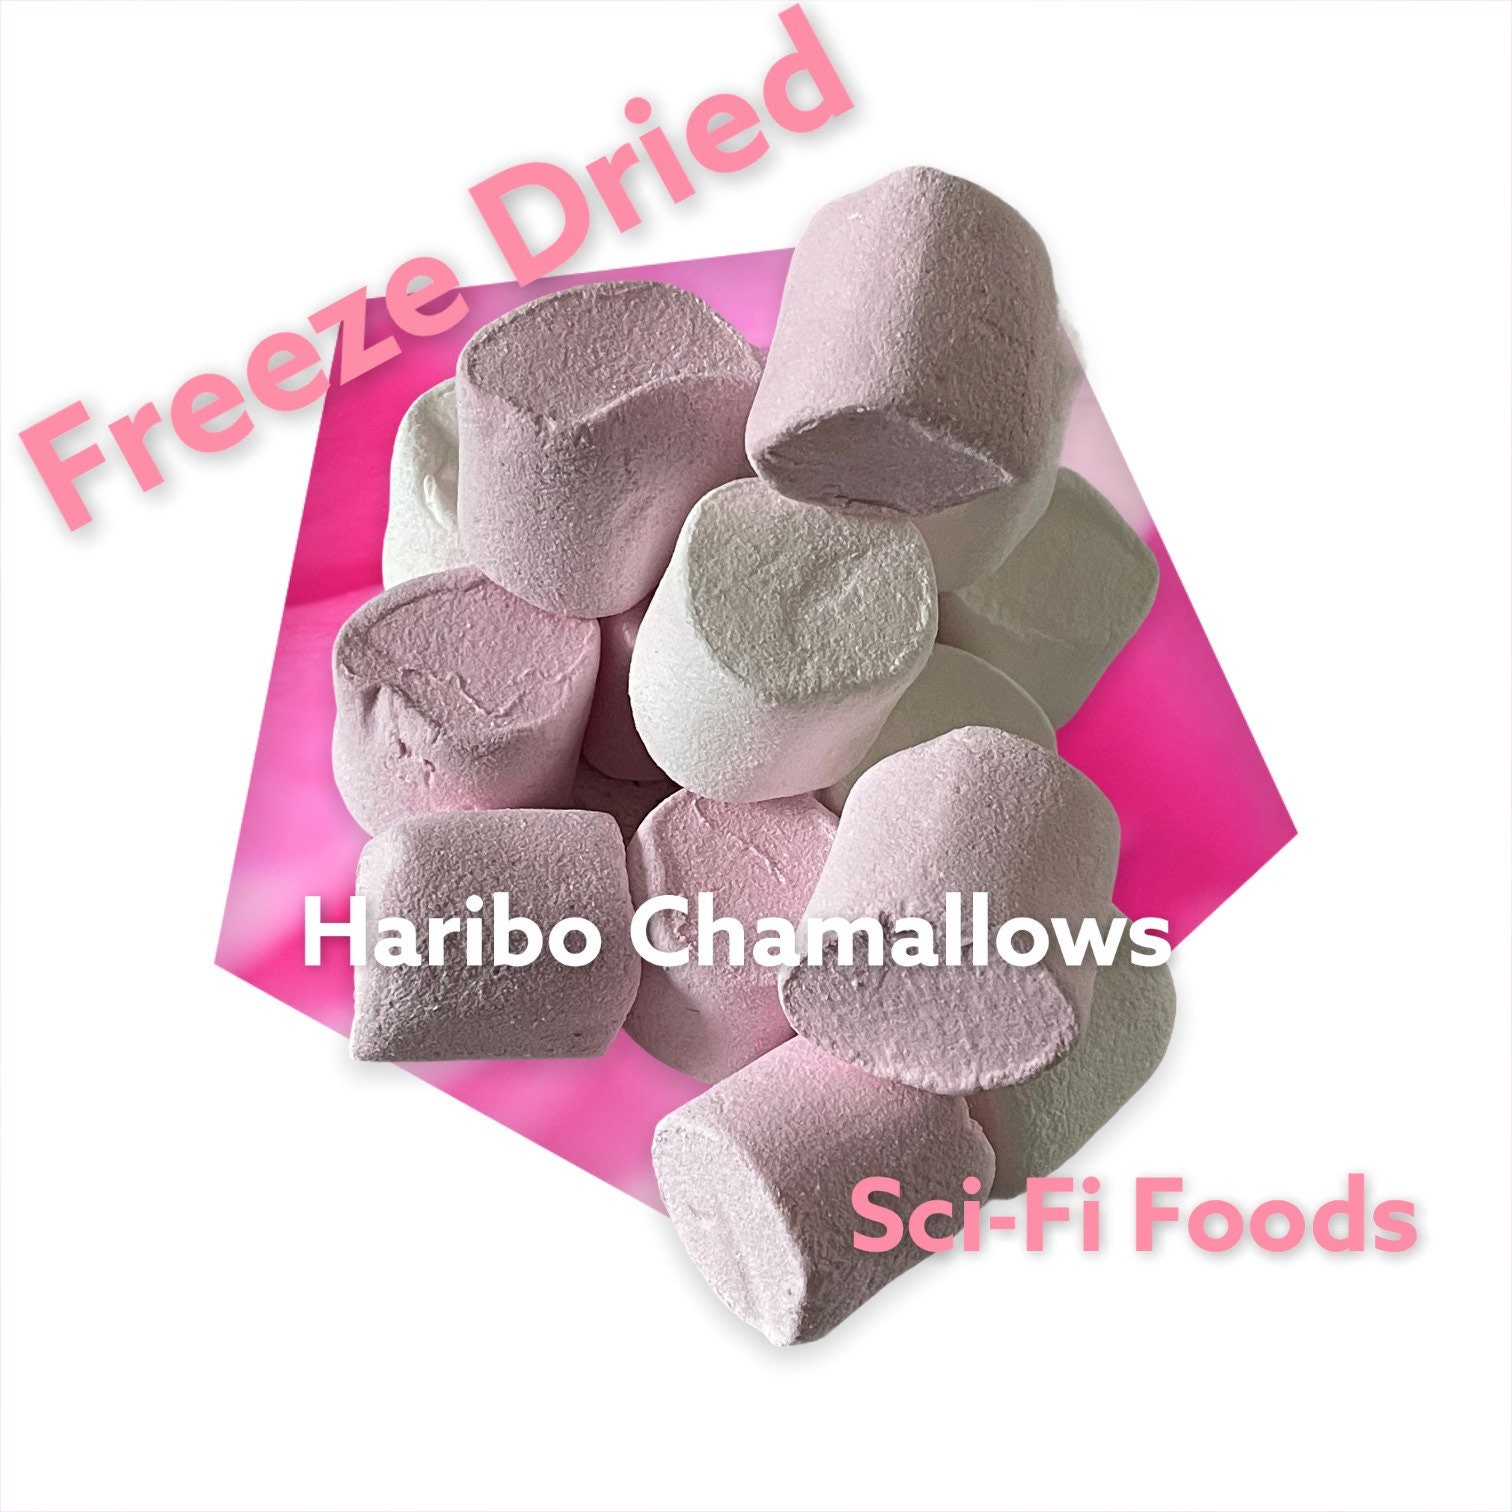 Sci-fi Foods UK Freeze Dried Skittles Round Fruit Flavoured Candy